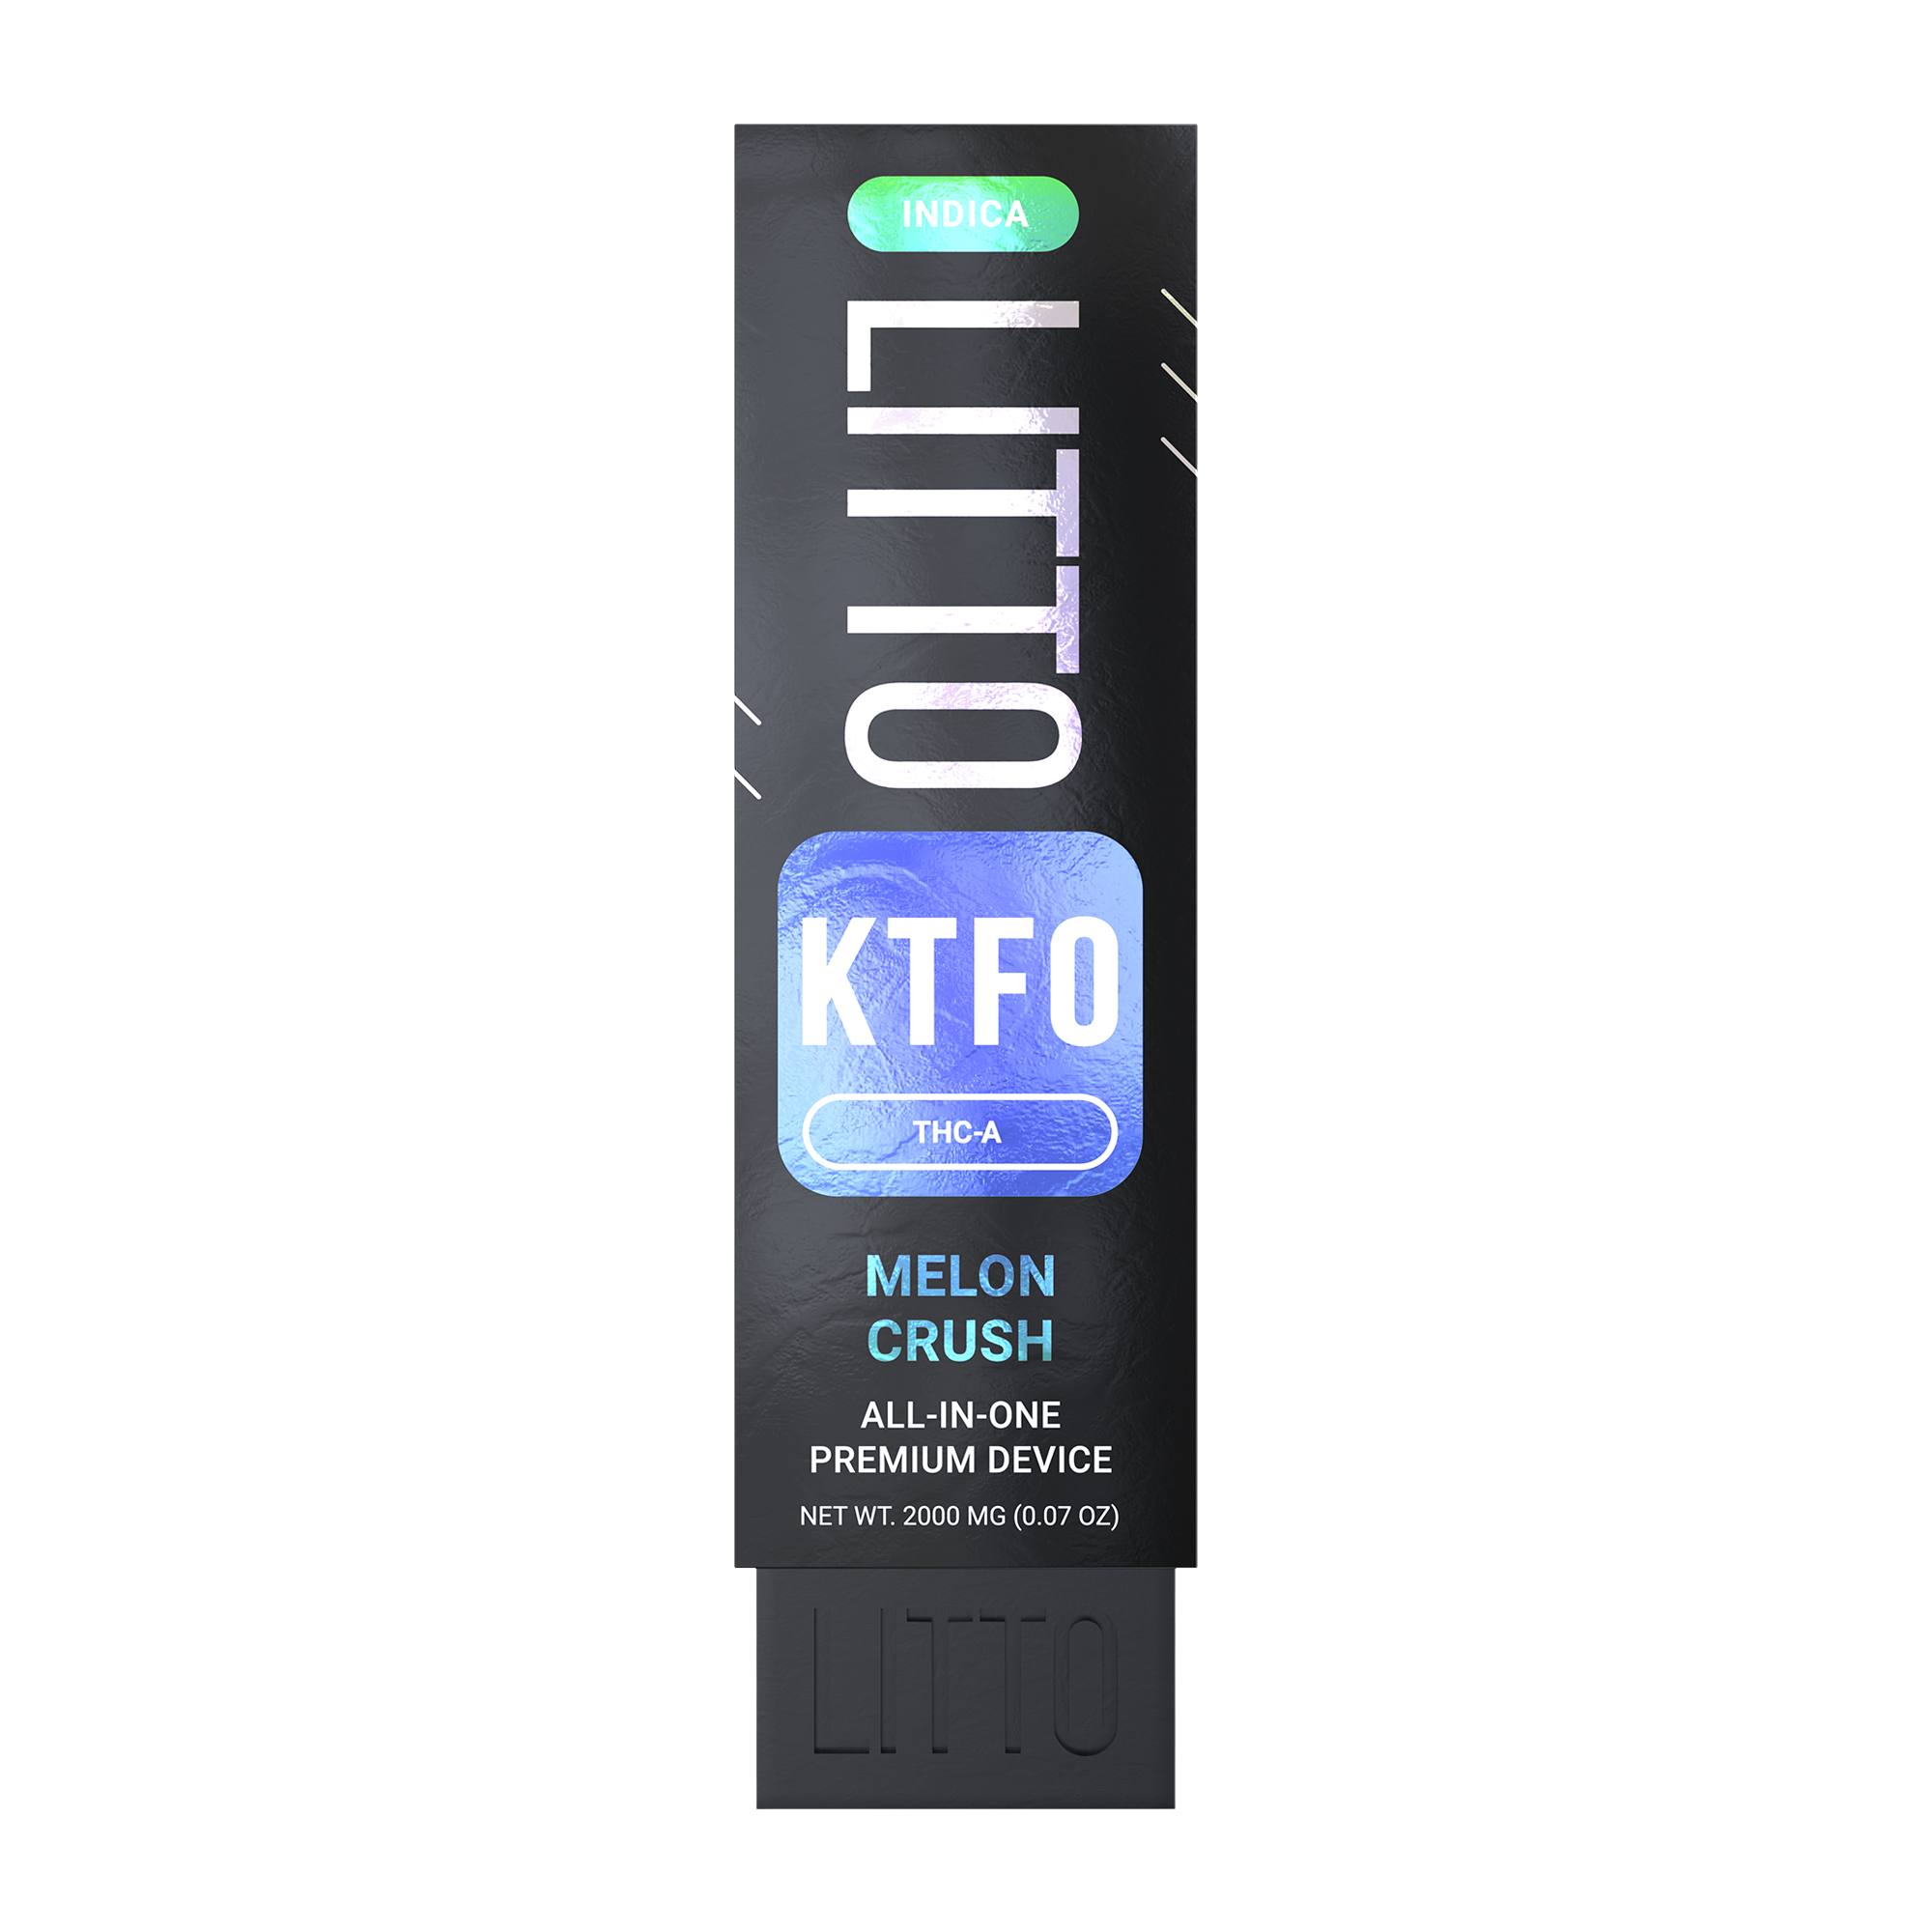 All-in-One Device - KTFO - THCA - Melon Crush - 2G